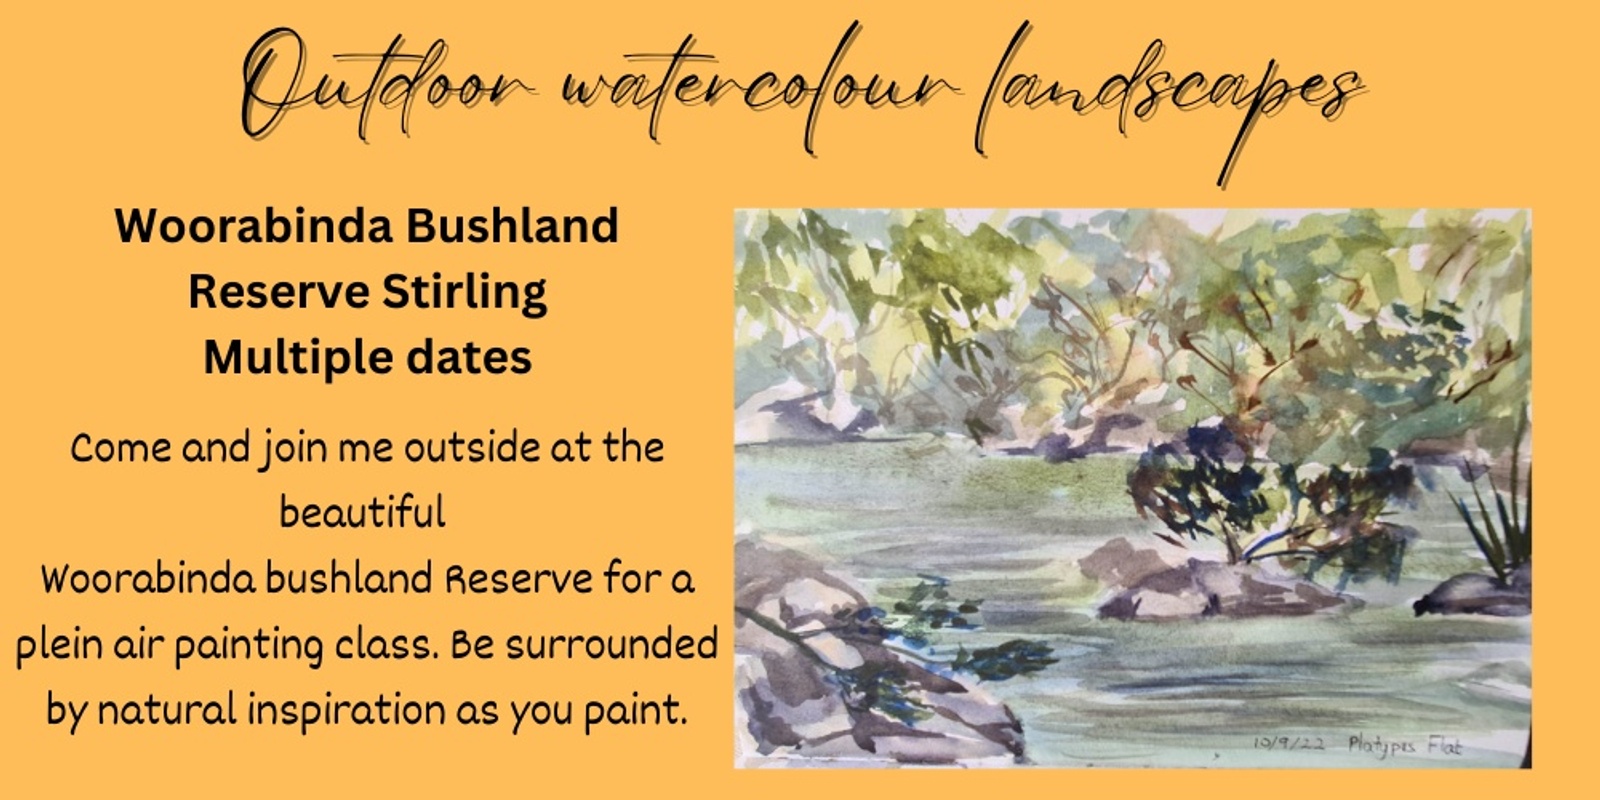 Banner image for Outdoor painting classes: Watercolour landscapes